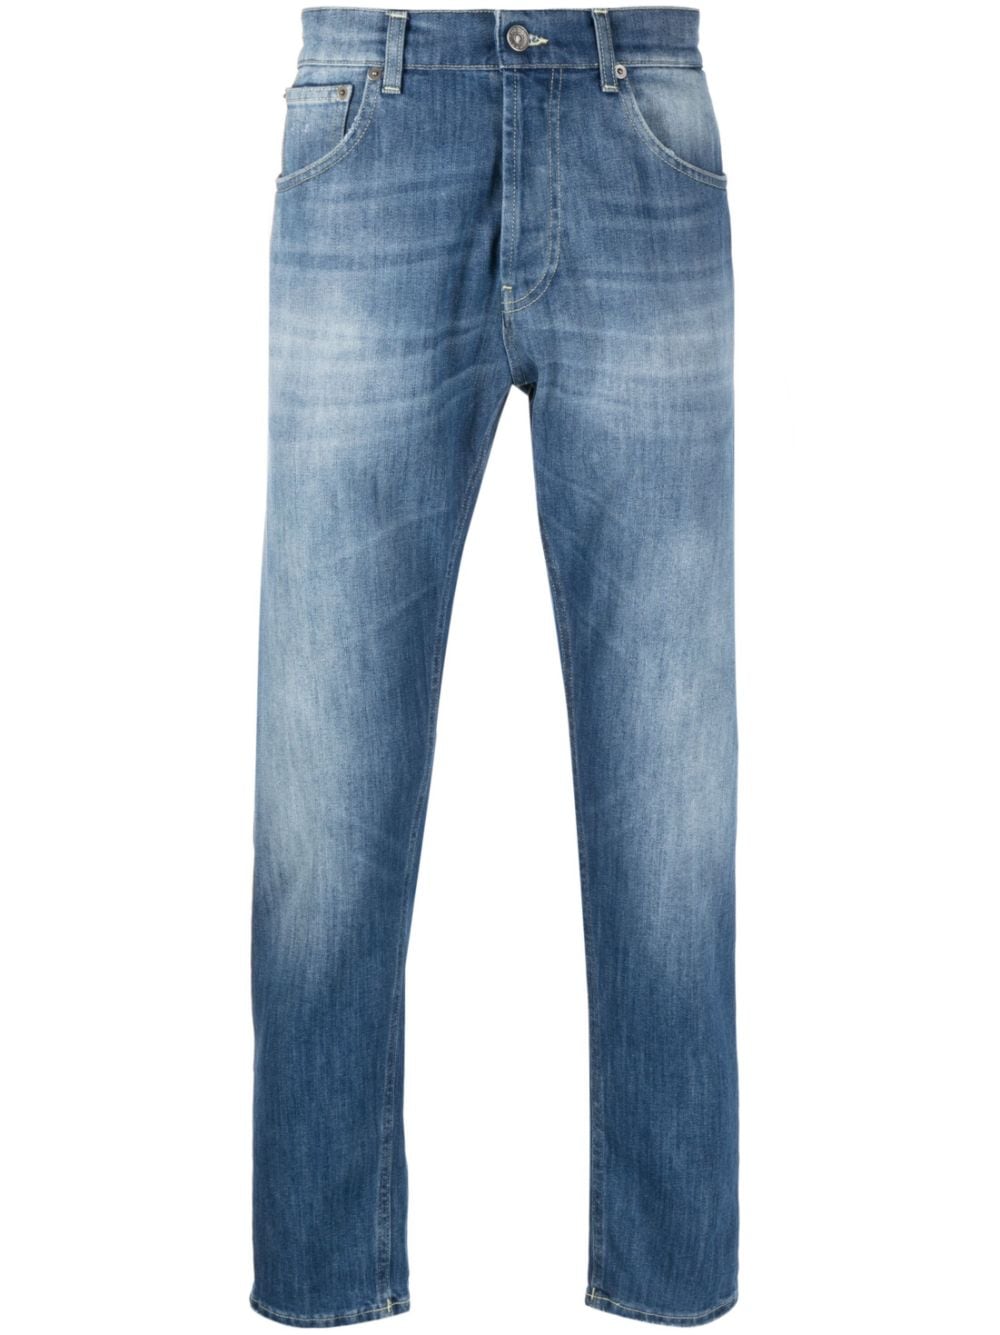 DONDUP whiskering-effect low-rise tapered jeans - Blue